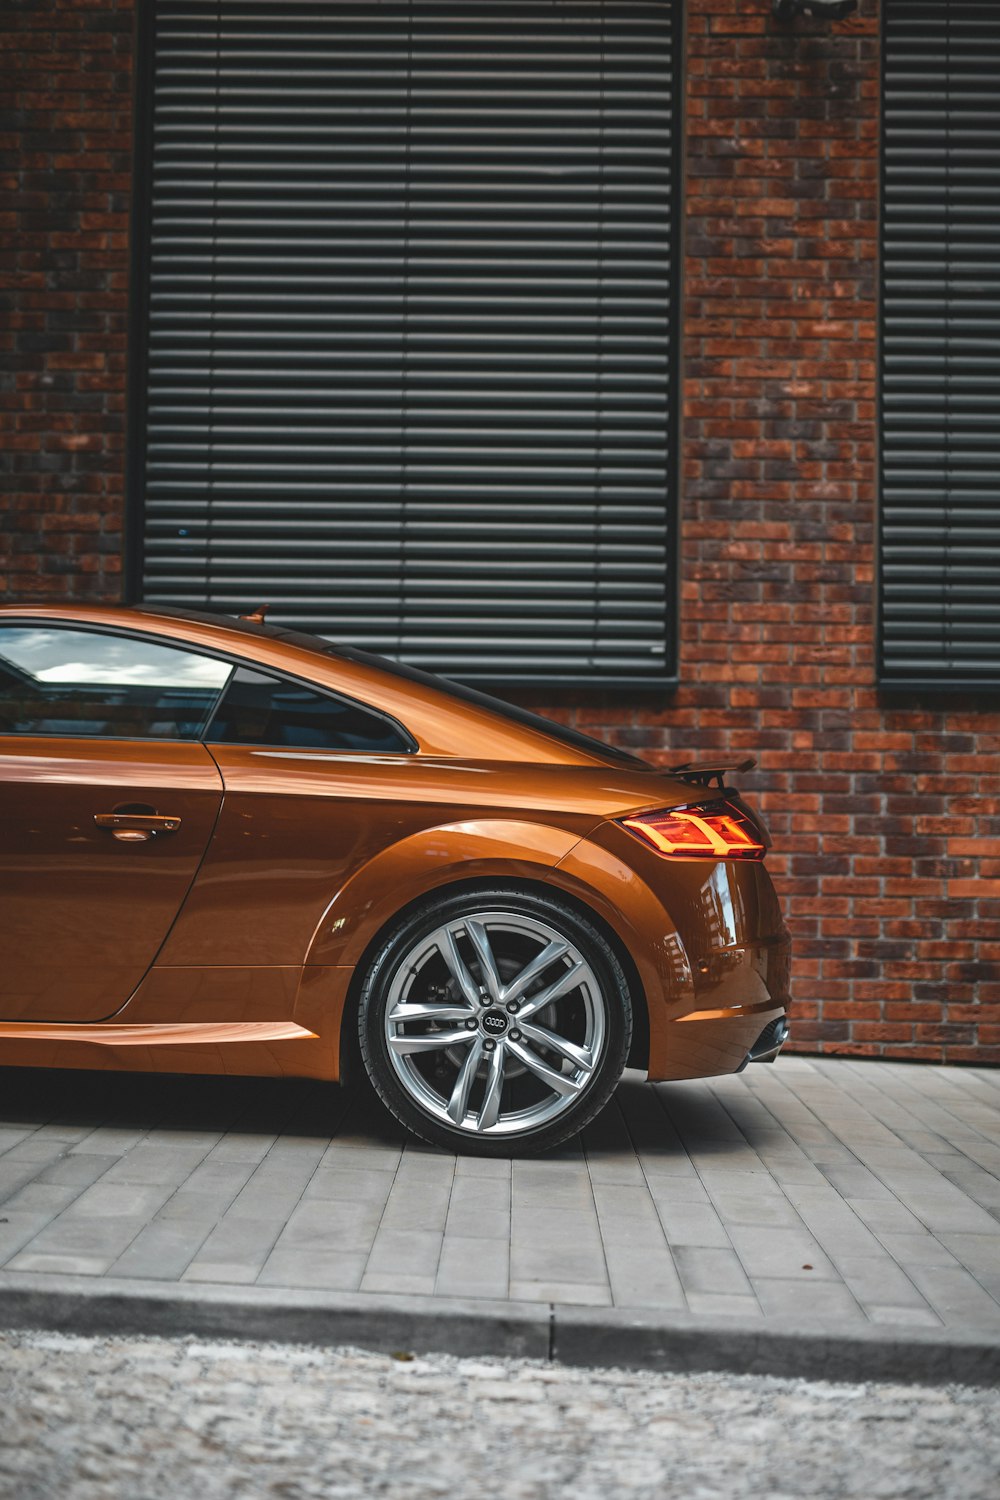 a brown sports car parked in front of a brick building